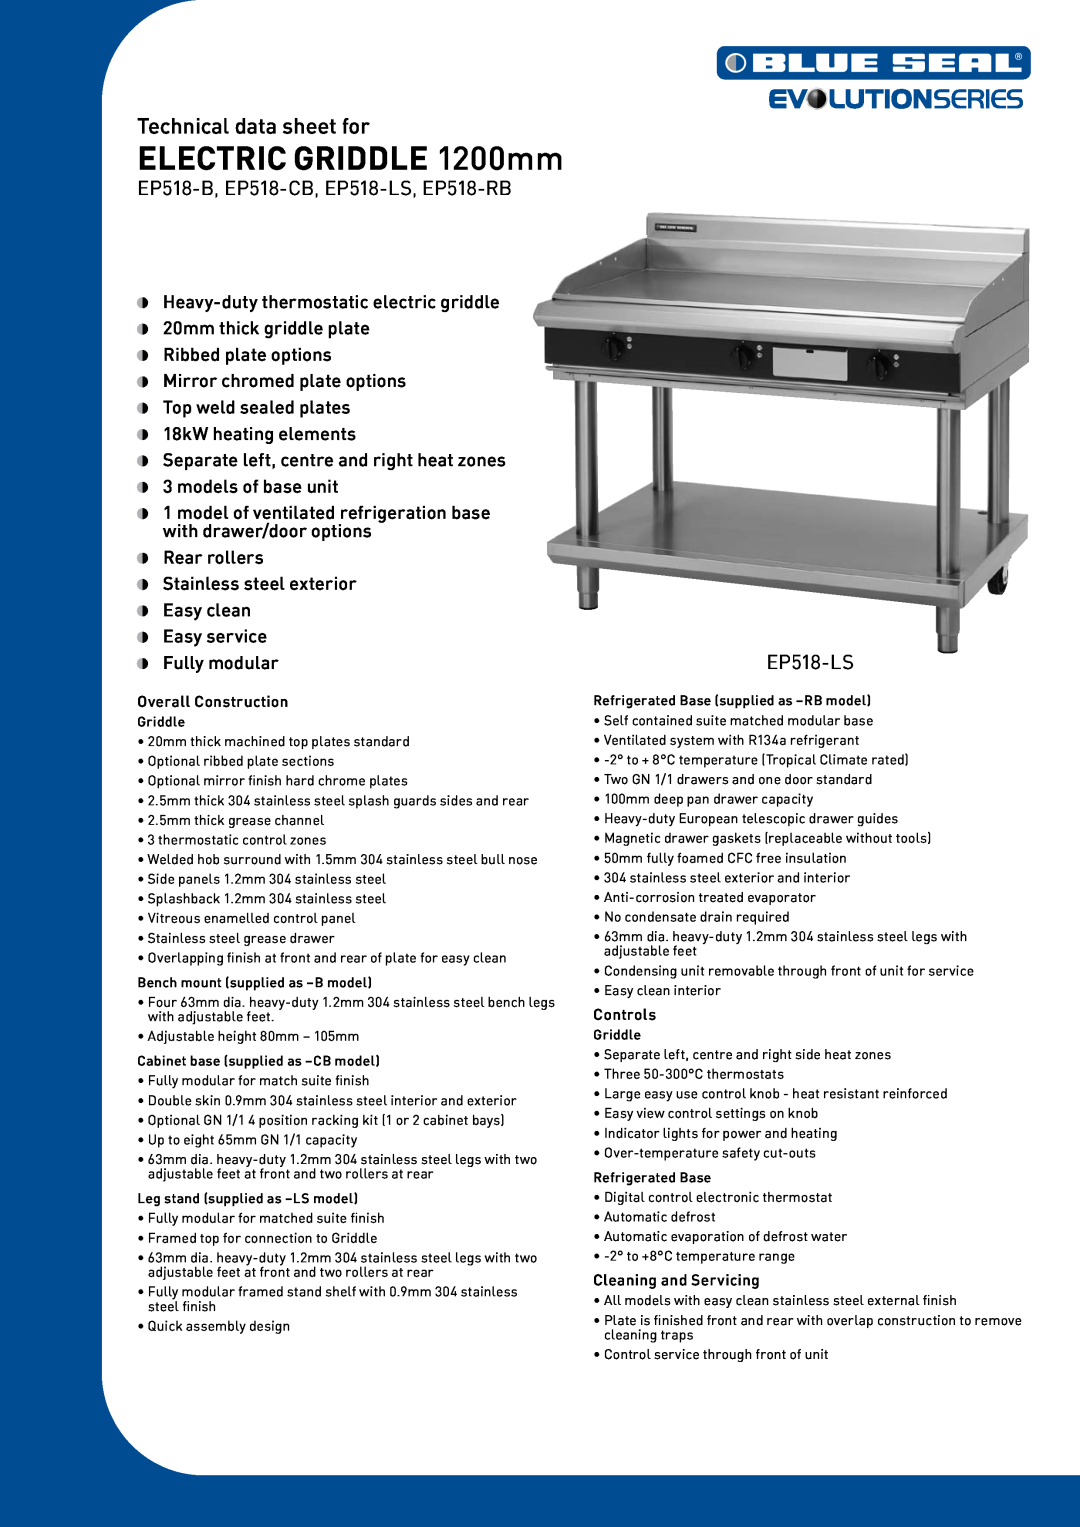 Moffat manual ELECTRIC GRIDDLE 1200mm, Technical data sheet for, EP518-B, EP518-CB, EP518-LS, EP518-RB 